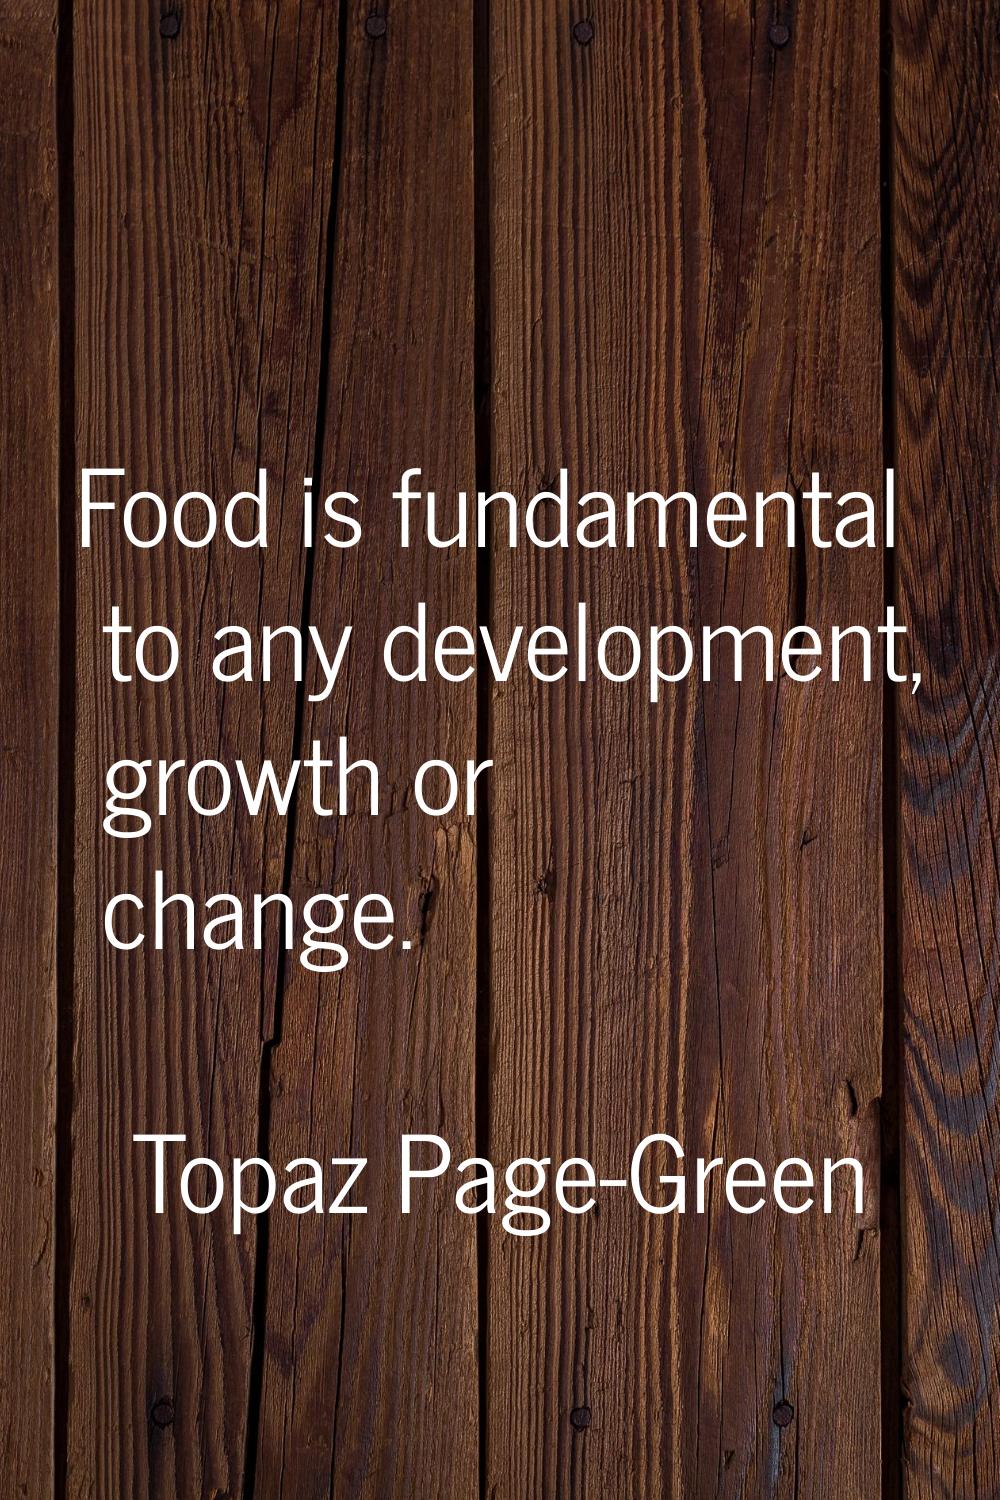 Food is fundamental to any development, growth or change.